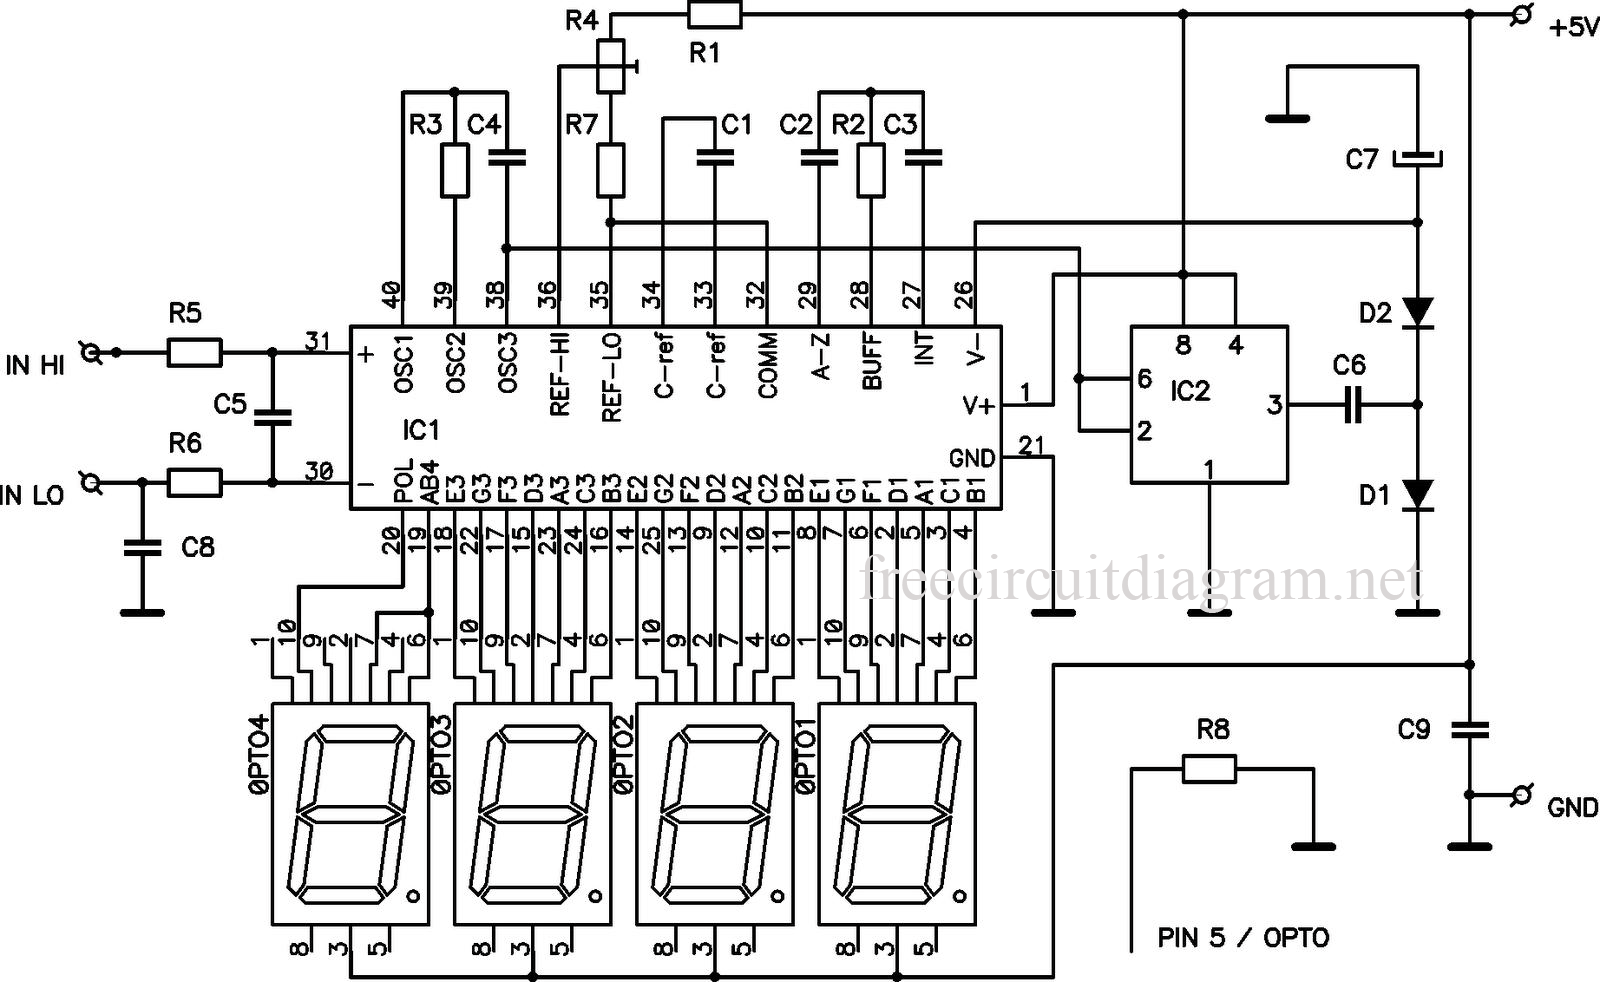 Digital LED Voltmeter Using ICL7107 under Repository ... dayton charger wiring diagram 